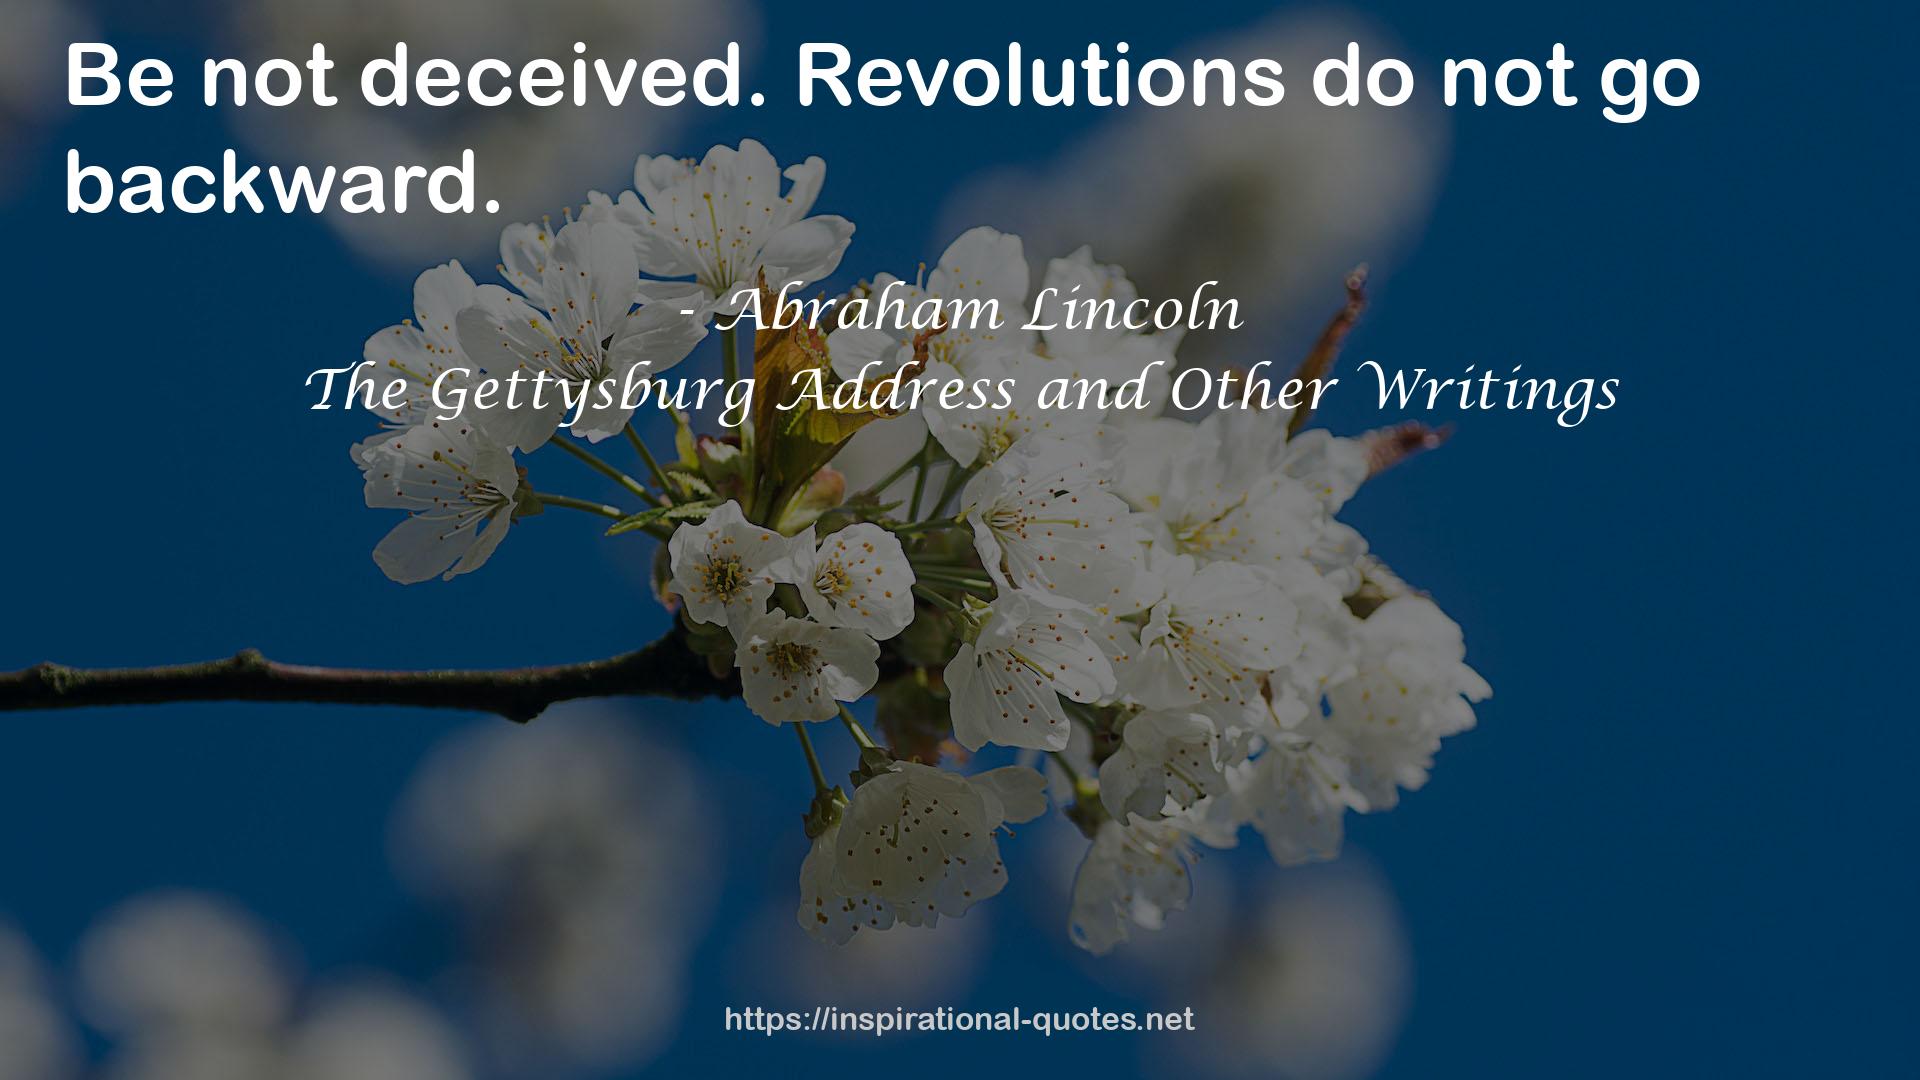 The Gettysburg Address and Other Writings QUOTES